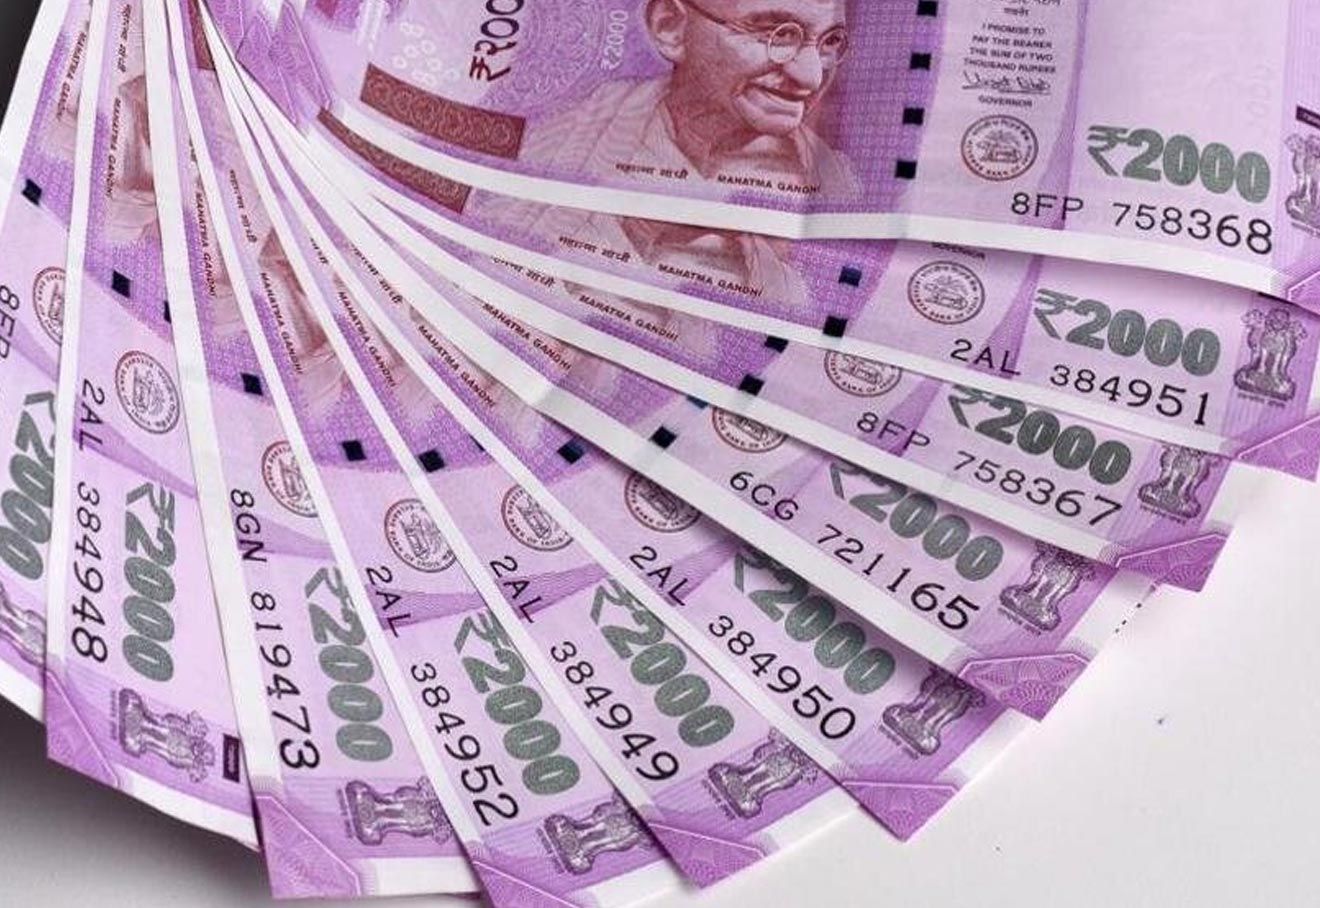 CTI Urges Delhi Businesses To Cease Acceptance Of Rs 2,000 Notes After Sept 29